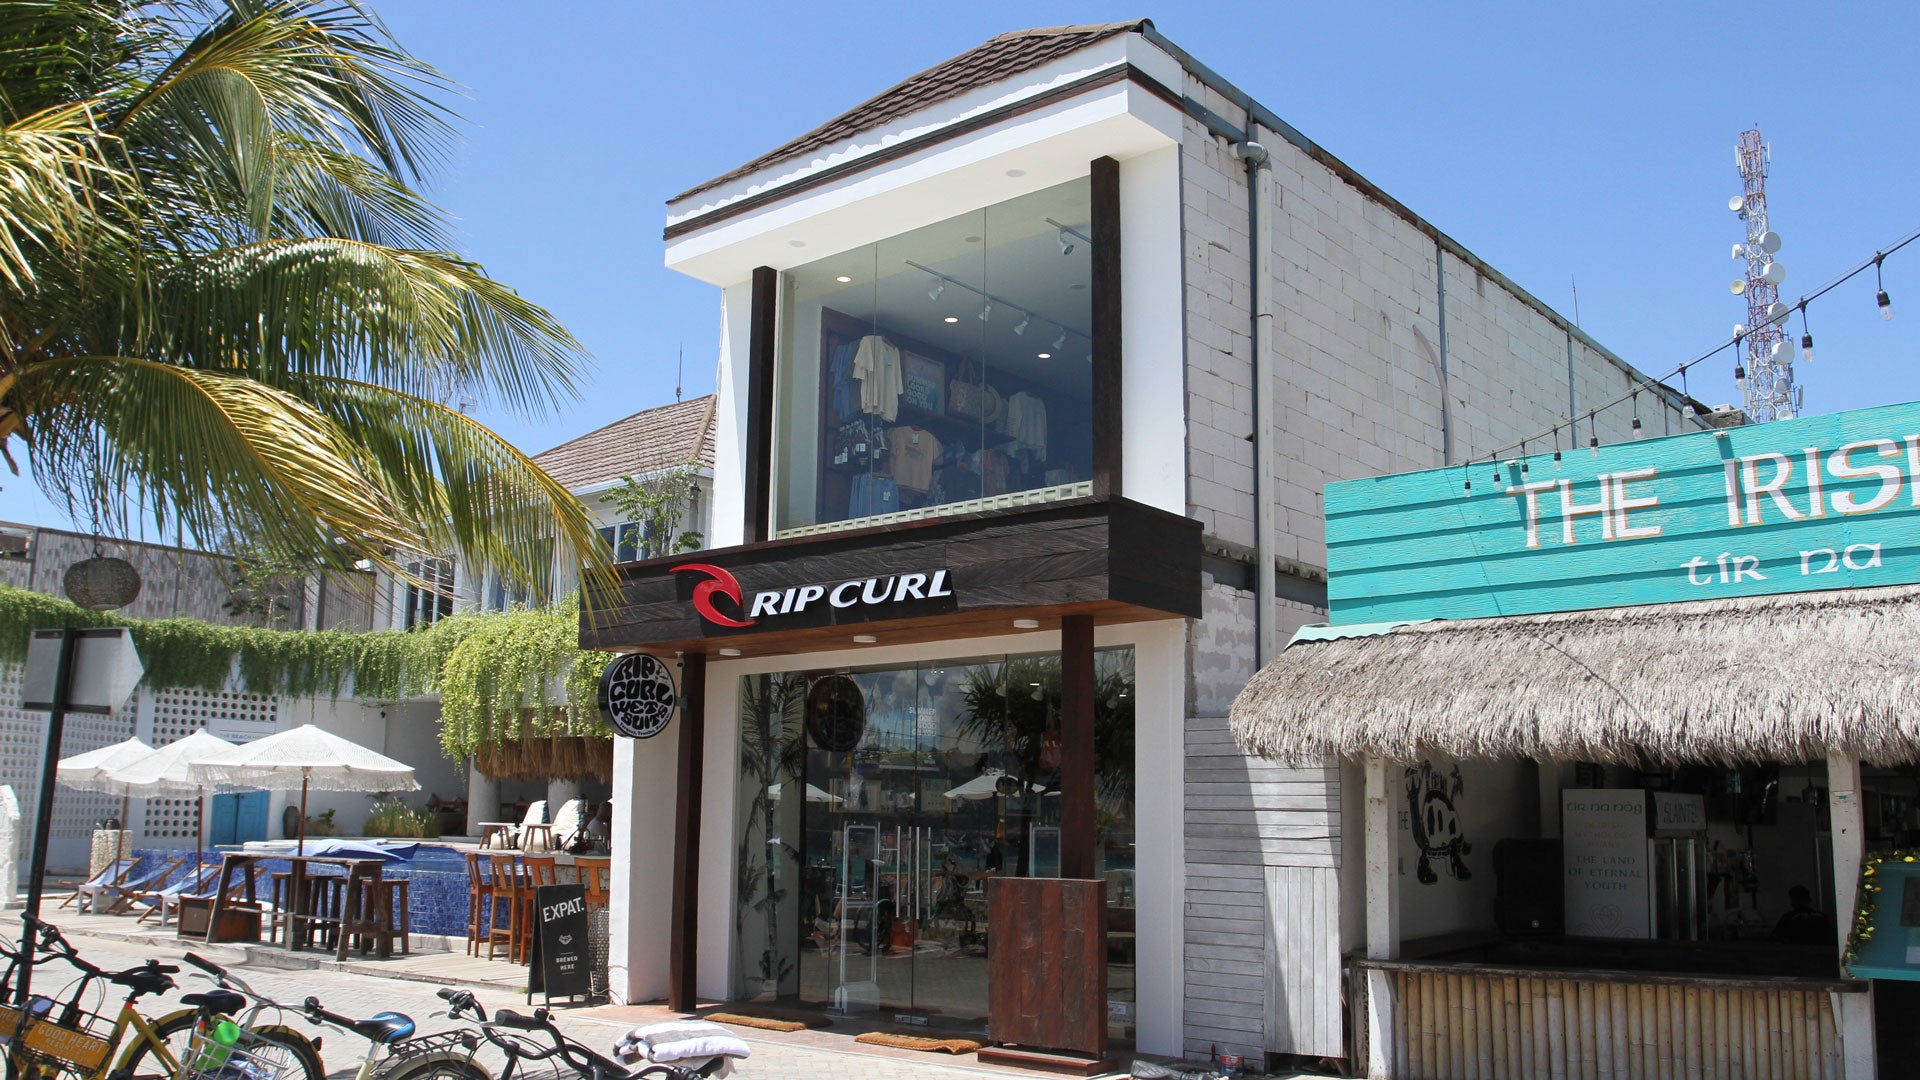 The First Rip Curl Flagship Store in Gili Trawangan With the Exotic Gili Beach Front View